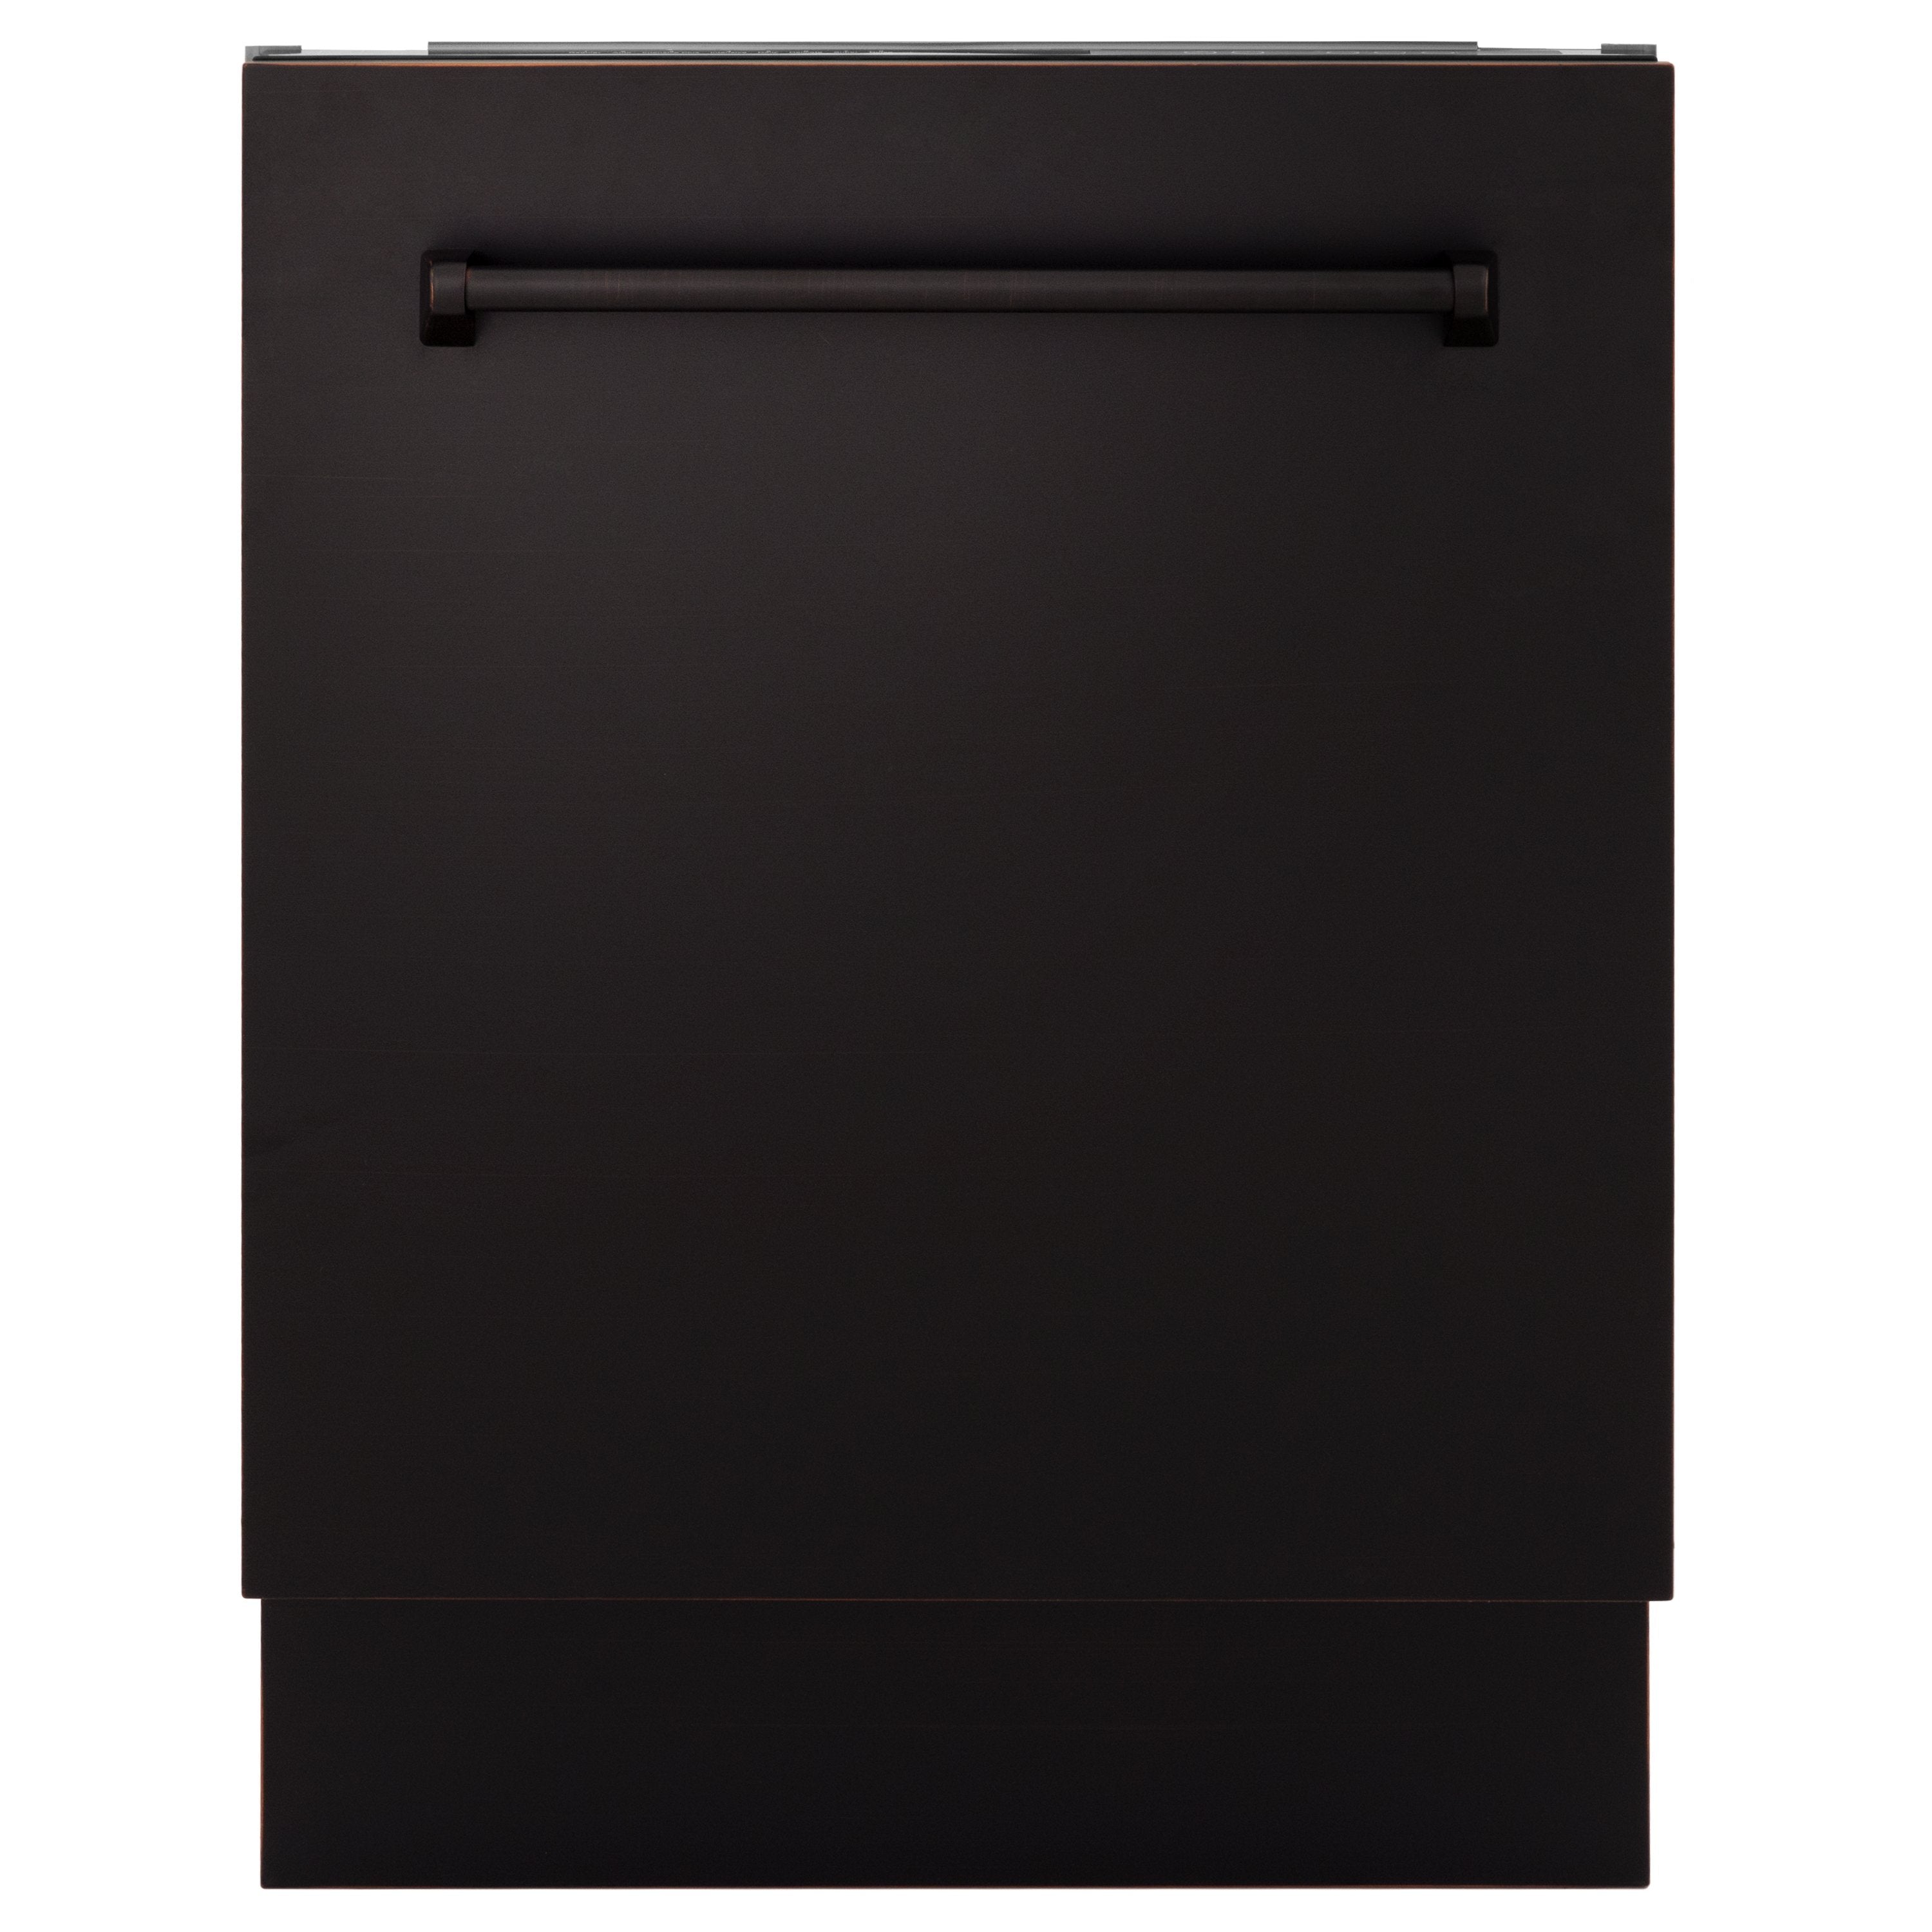 ZLINE 24 in. Top Control Tall Dishwasher in Oil Rubbed Bronze with 3rd Rack